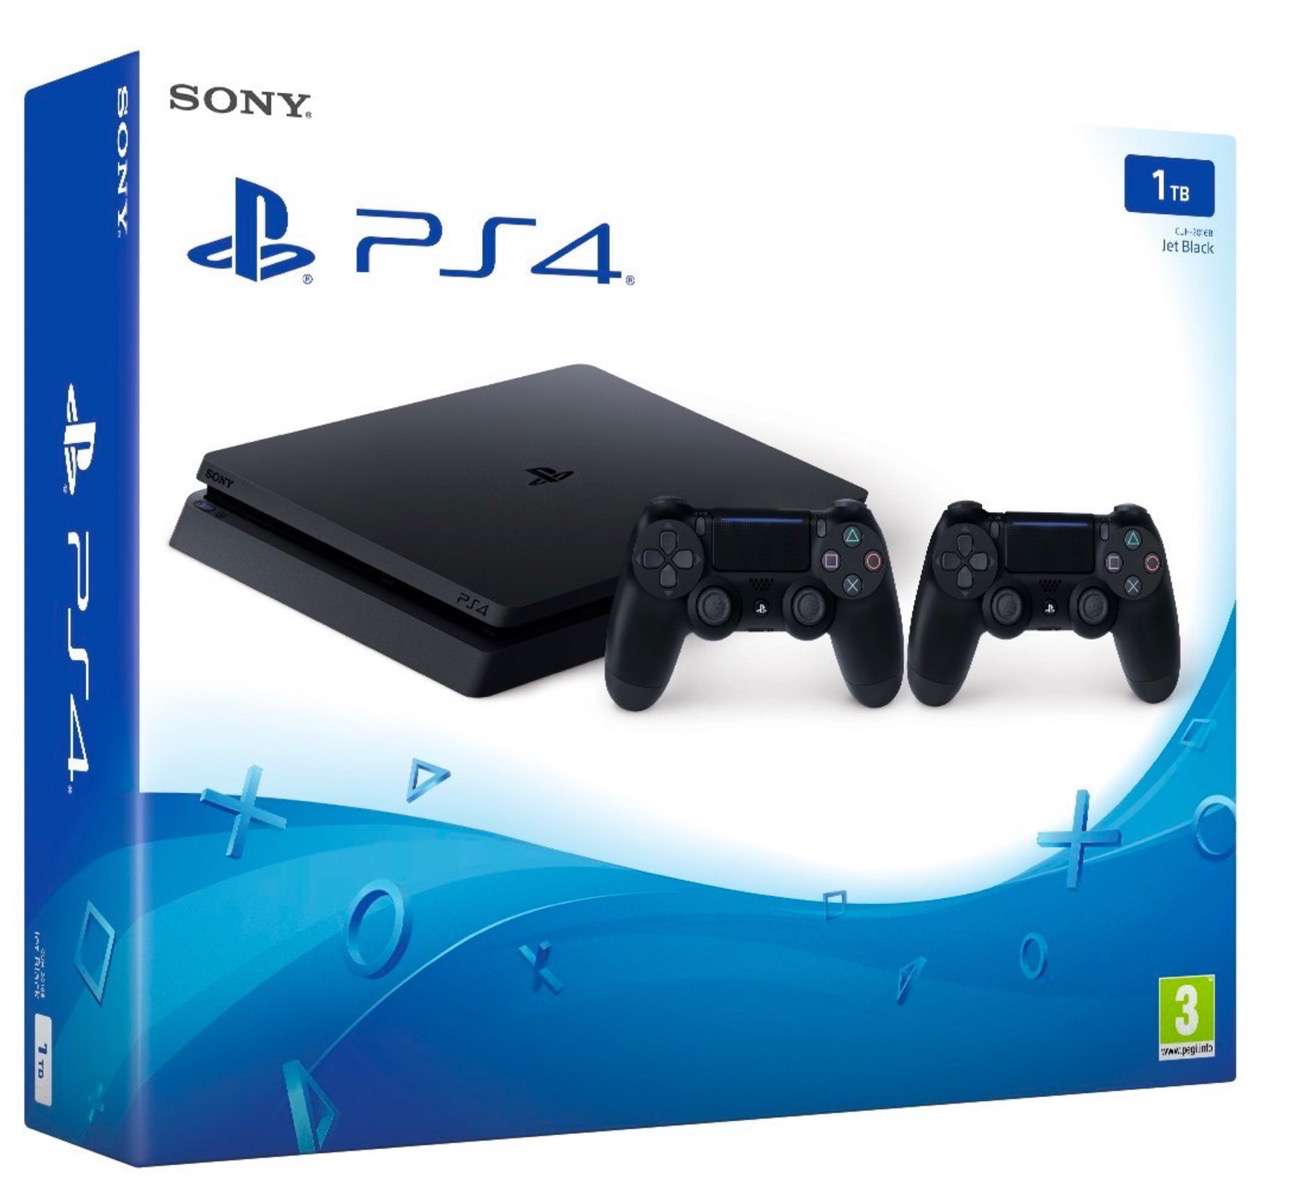 Pack Playstation 4 (PS4) con dos mandos: Playstation 4 1 TB D Chassis Slim + 2° Controller Dualshock Wireless